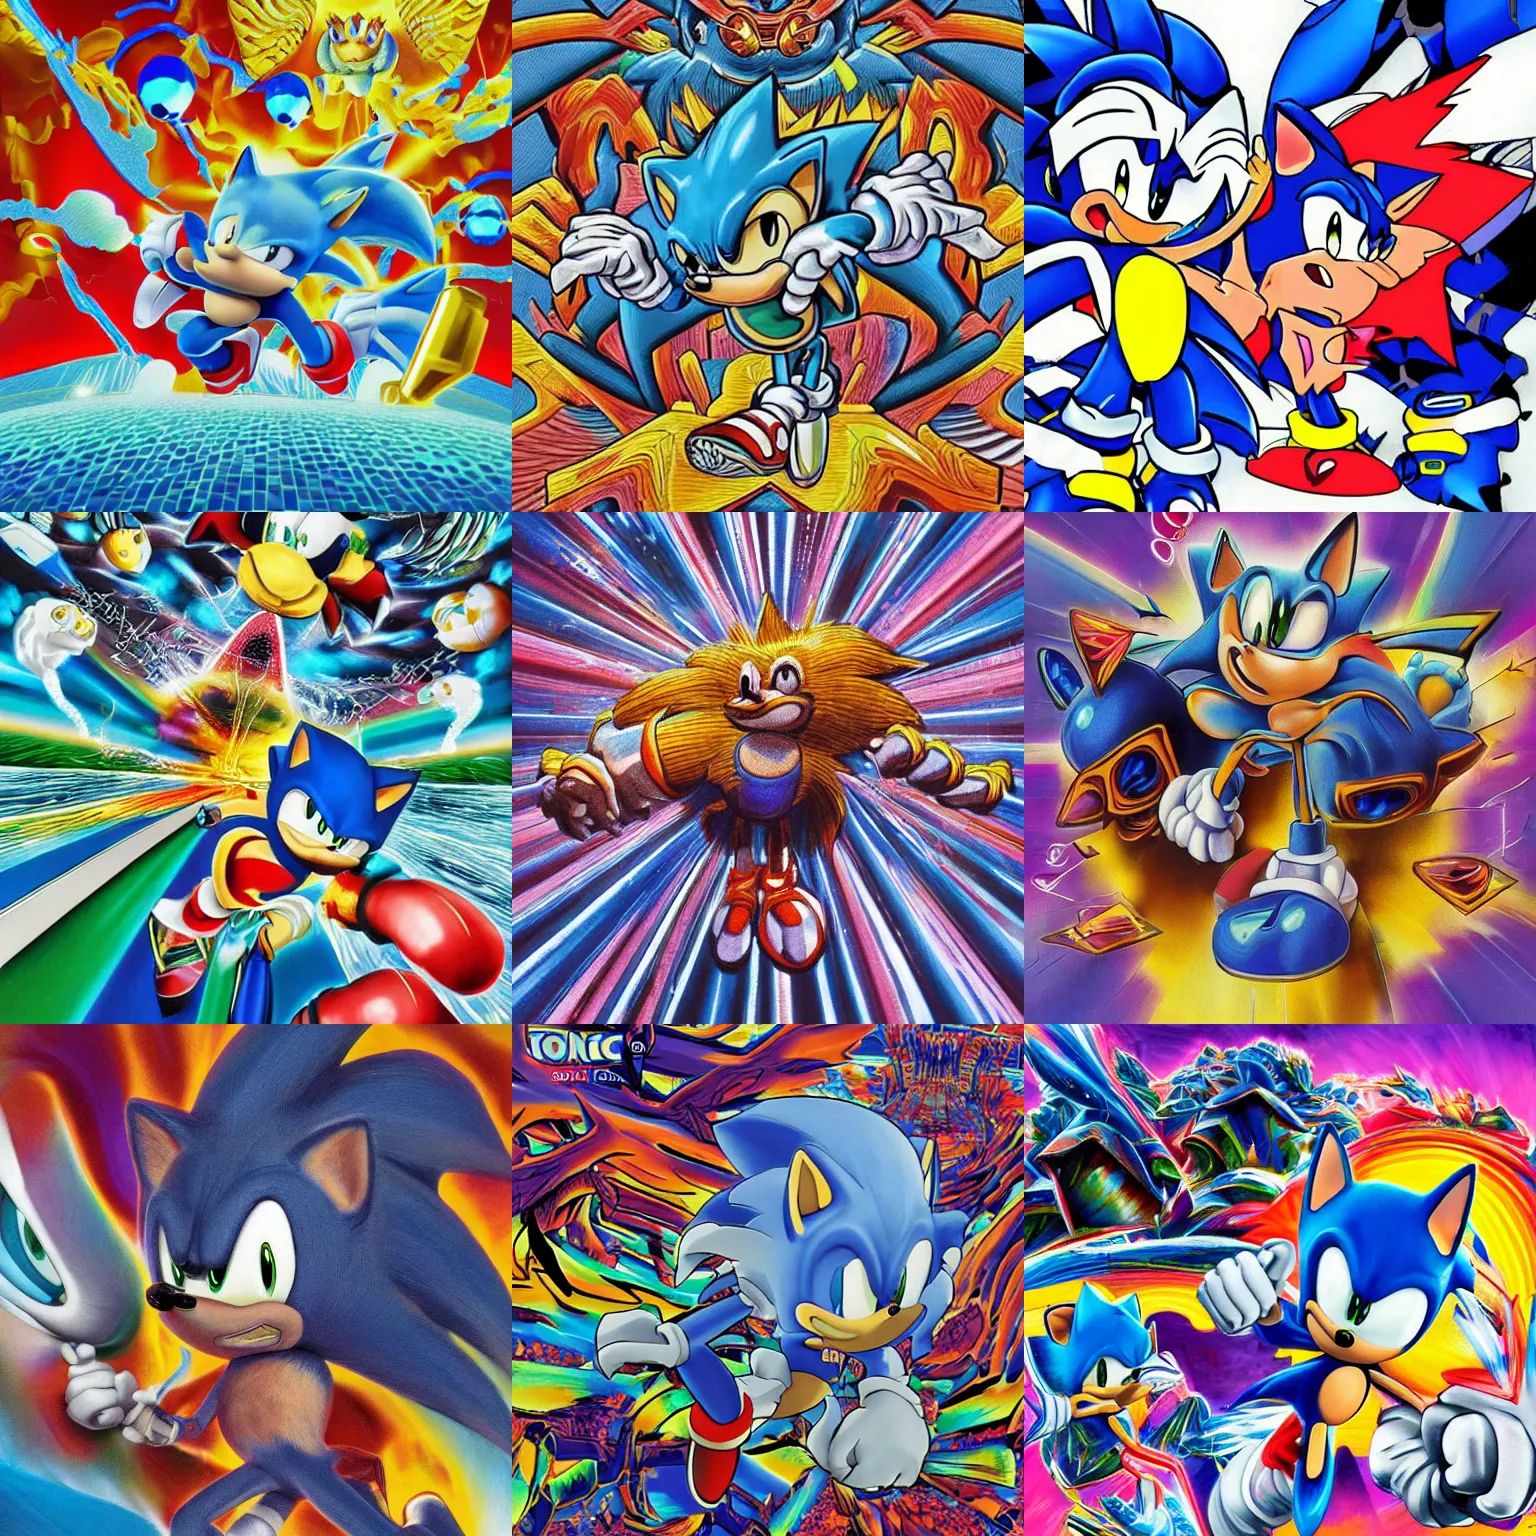 Prompt: sonic the hedgehog in a surreal, sharp, detailed professional, high quality airbrush art MGMT album cover of a chrome dissolving LSD DMT blue sonic the hedgehog surfing through cyberspace made of eyeballs, checkerboard horizon , 1990s 1992 Sega Genesis video game album cover